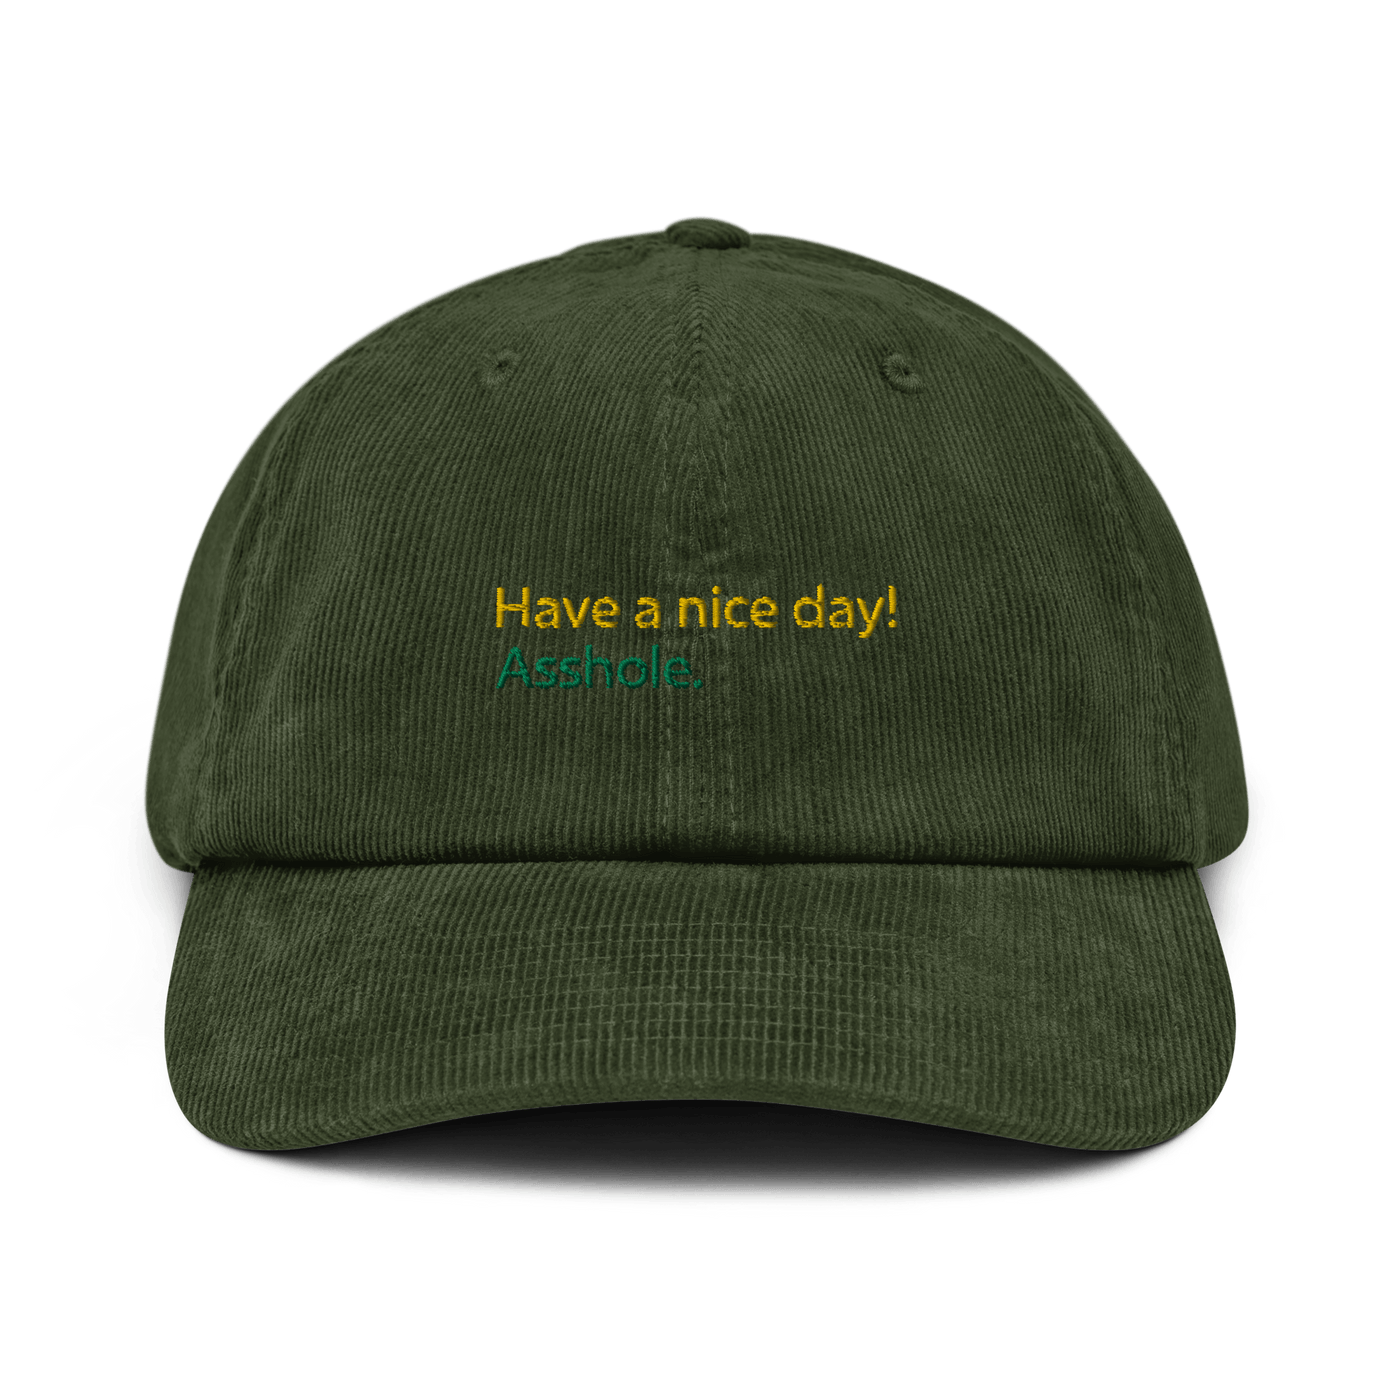 Have a nice day! (asshole) Corduroy hat - Dark Olive - - Just Another Cap Store